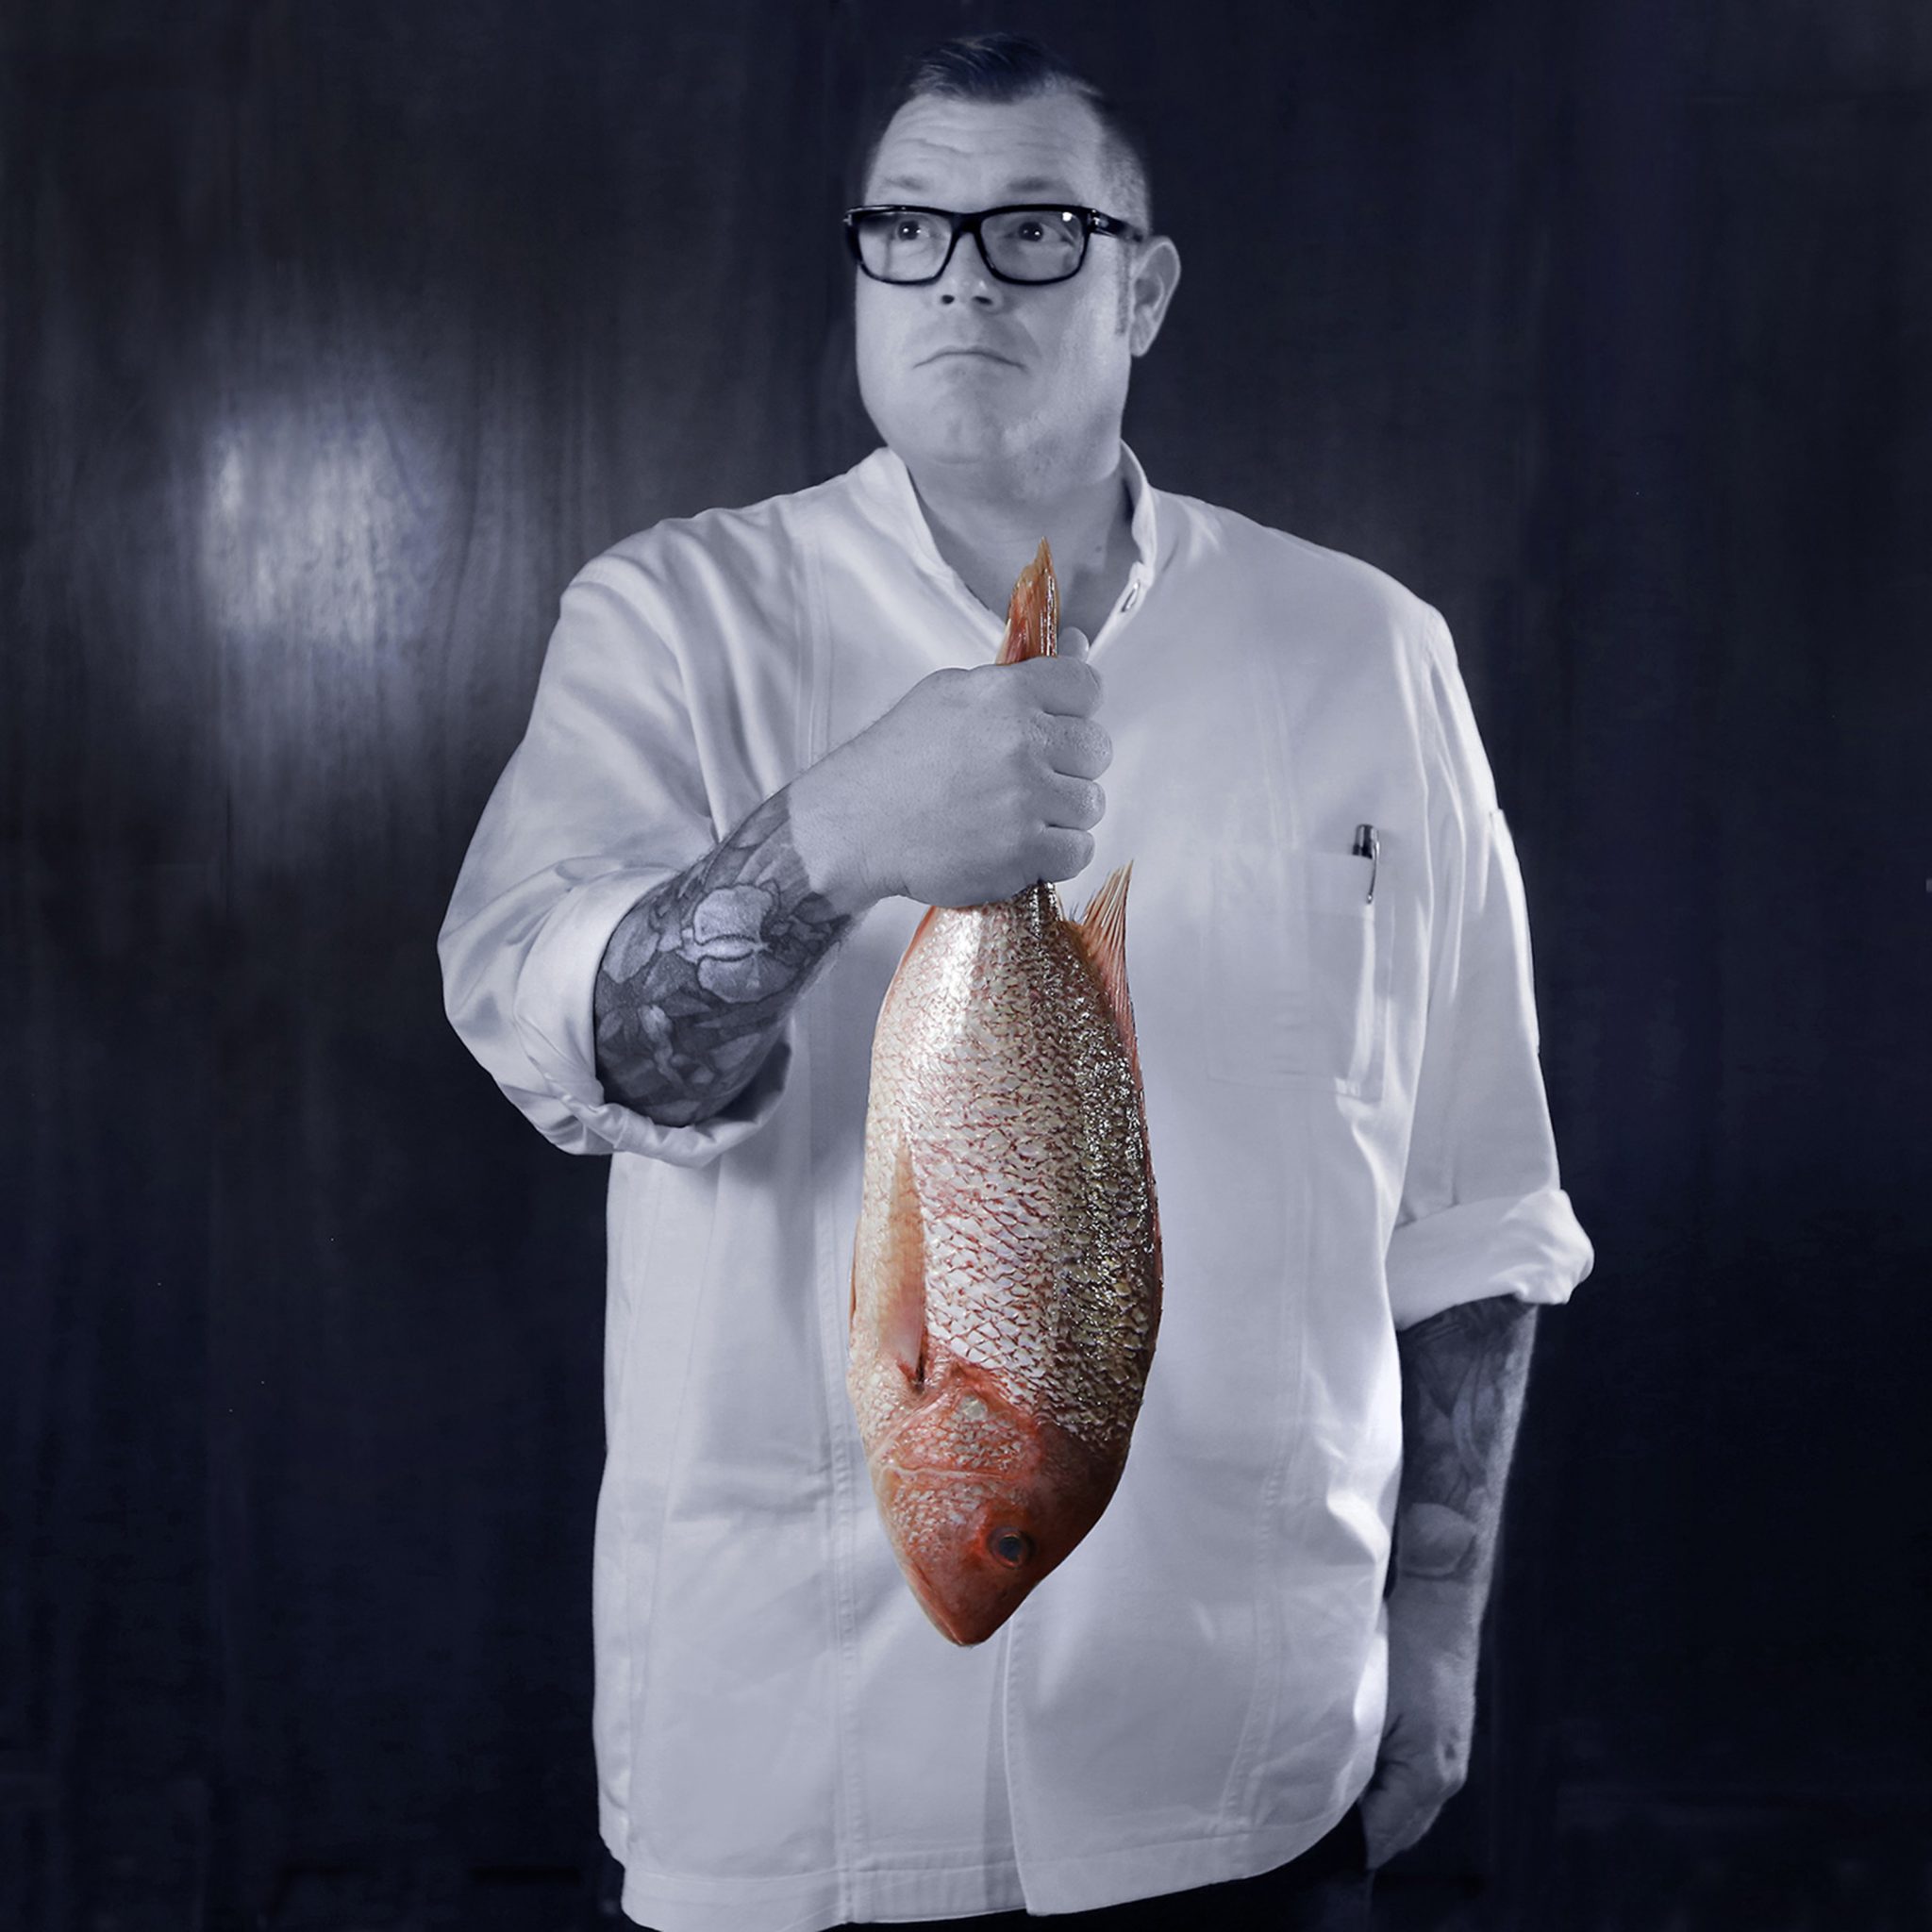 picture of Director of Culinary, Chef Brian Wubbena in a black and white photo holding a fresh fish that is in the color orange.